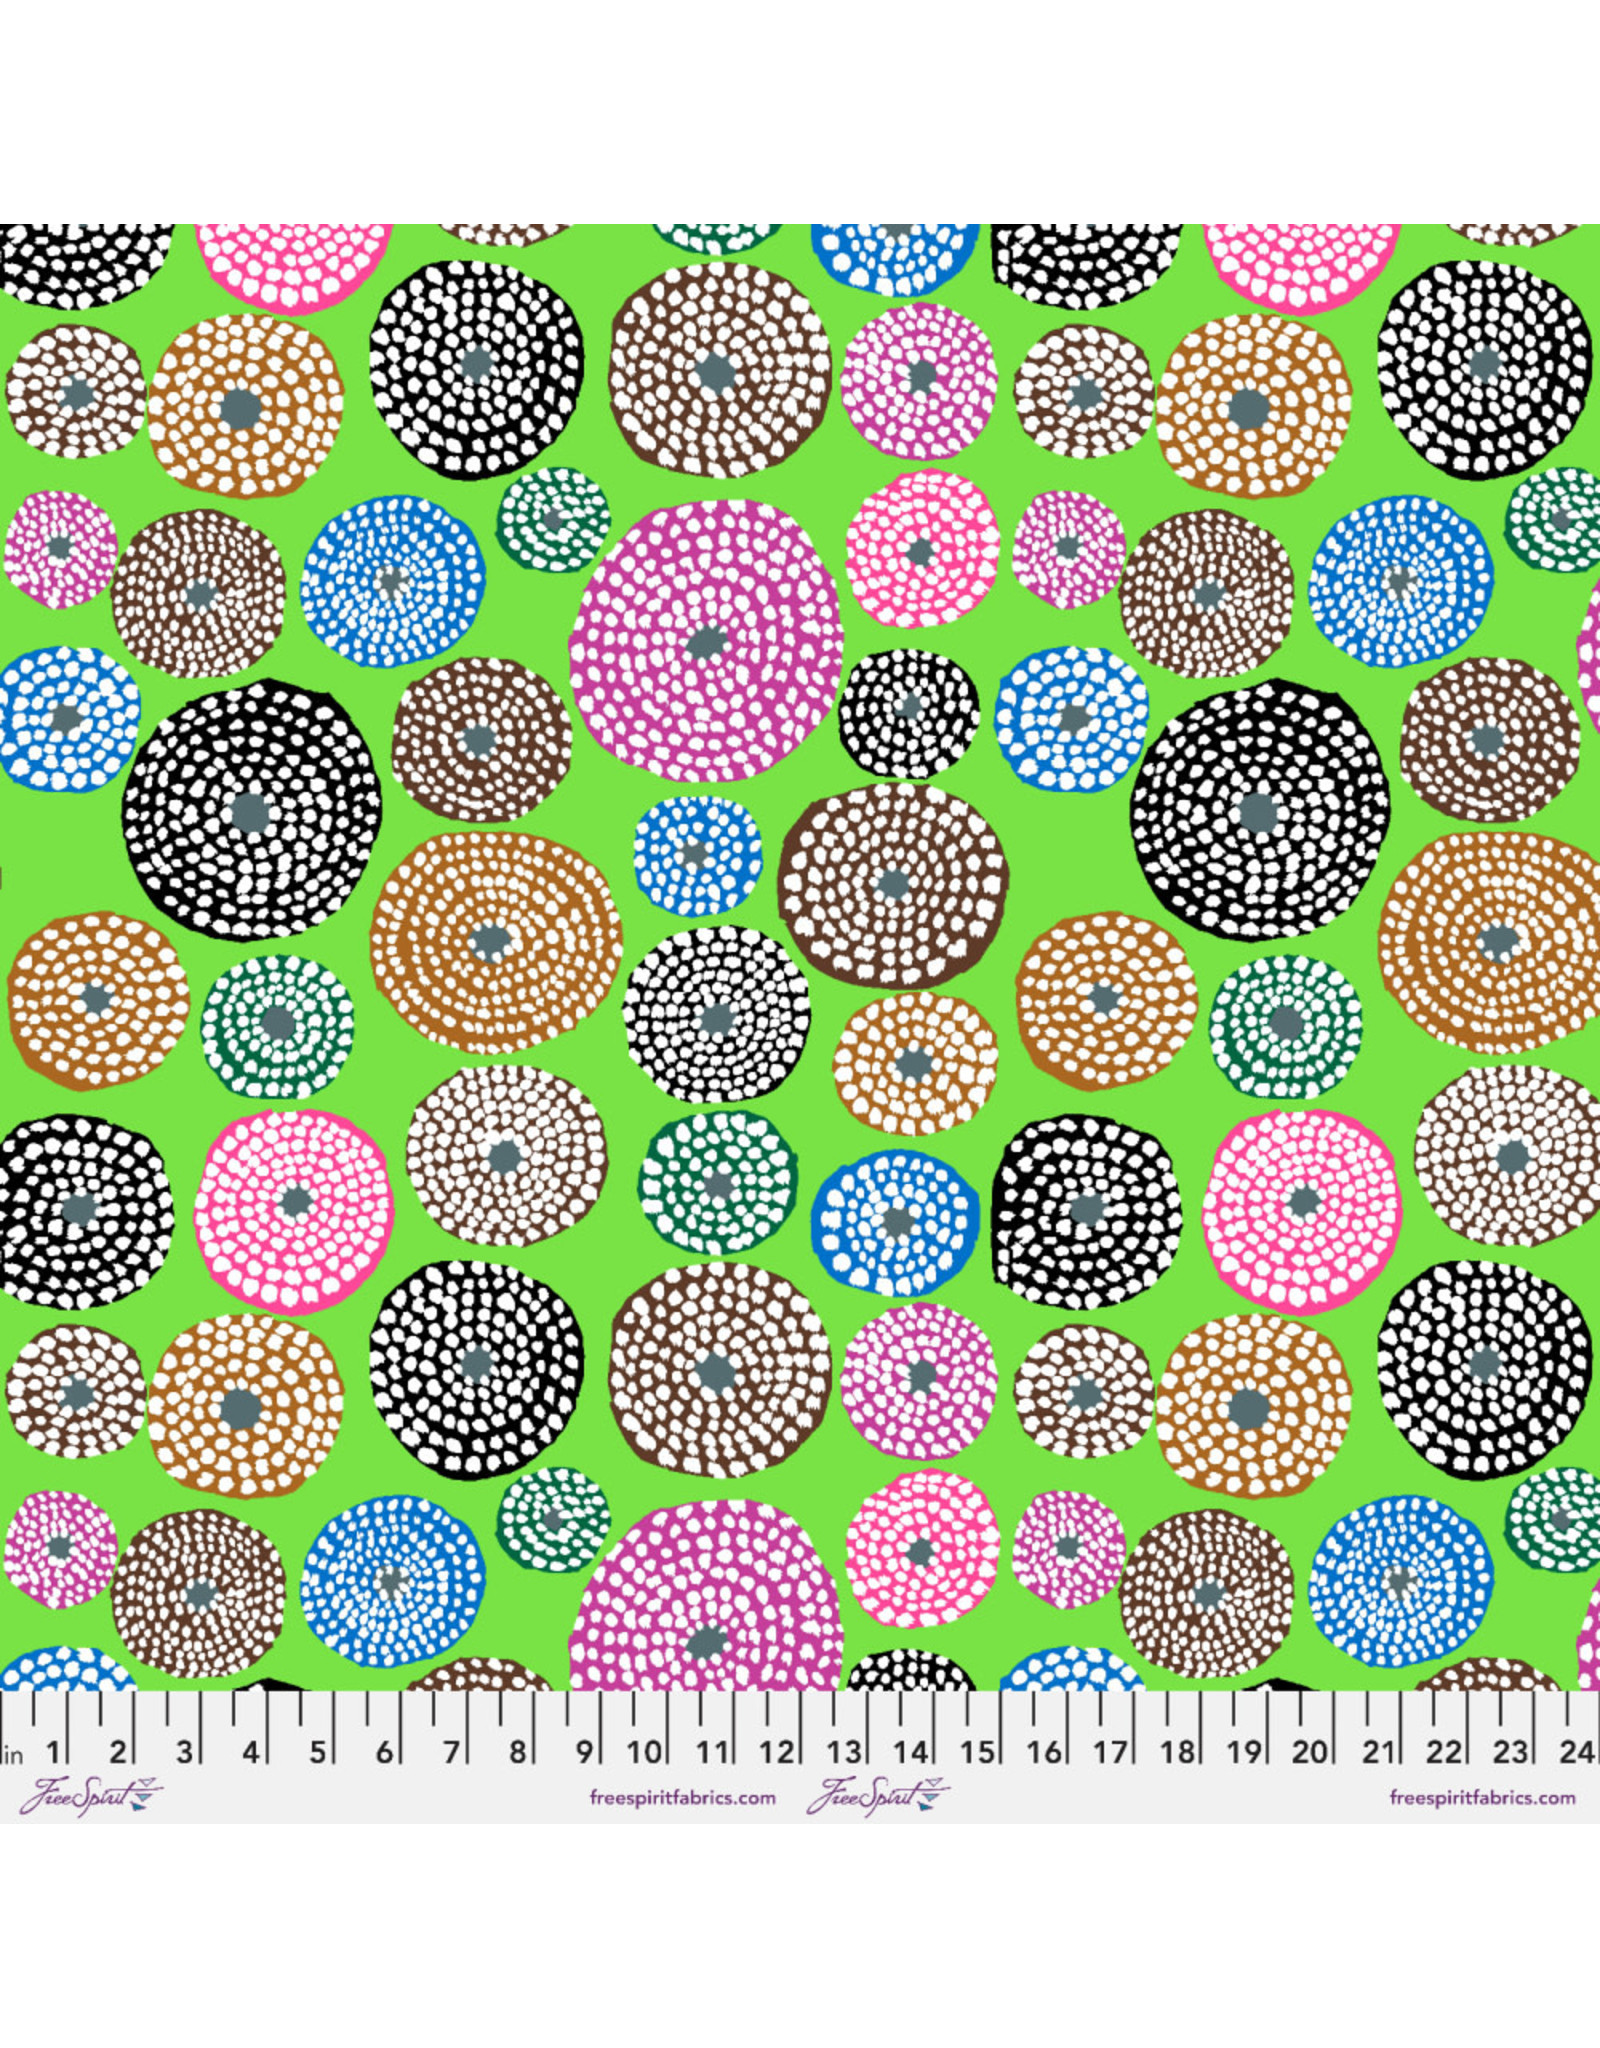 PD's Kaffe Fassett Collection Kaffe Collective, Disks in Lime, Dinner Napkin